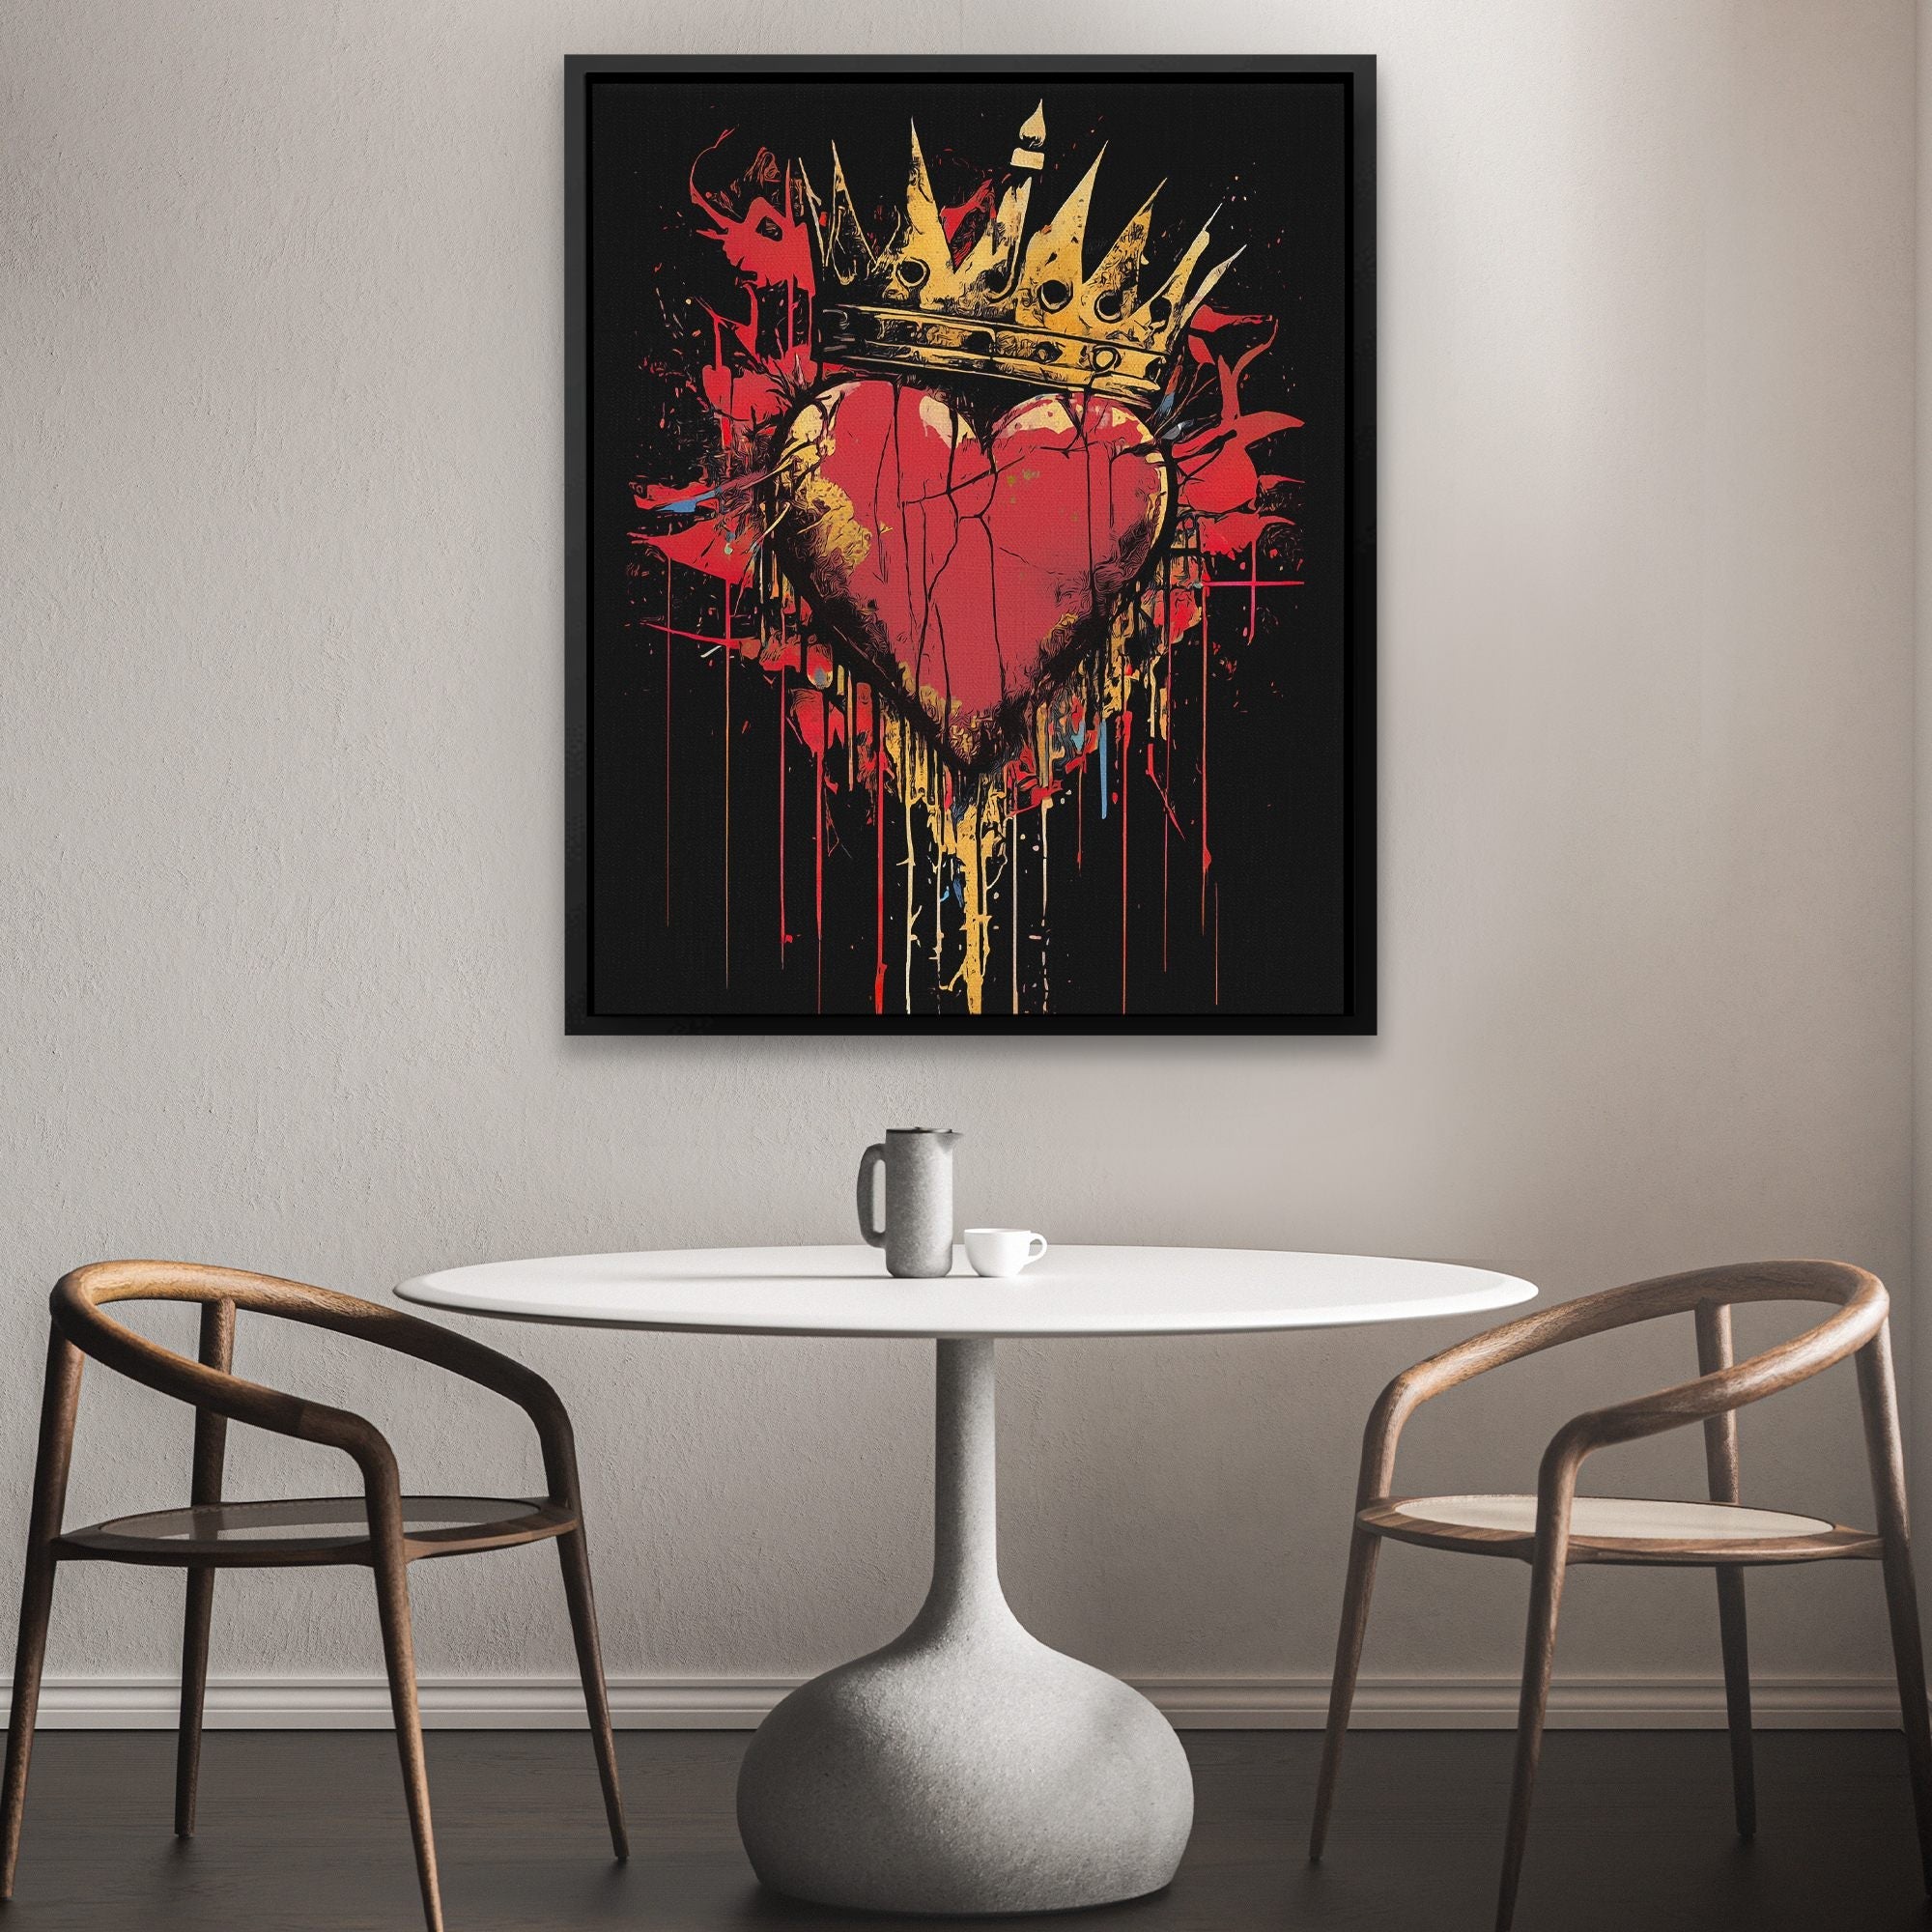 Urban Street Art Masterpiece - A King's Power of Love - Thedopeart